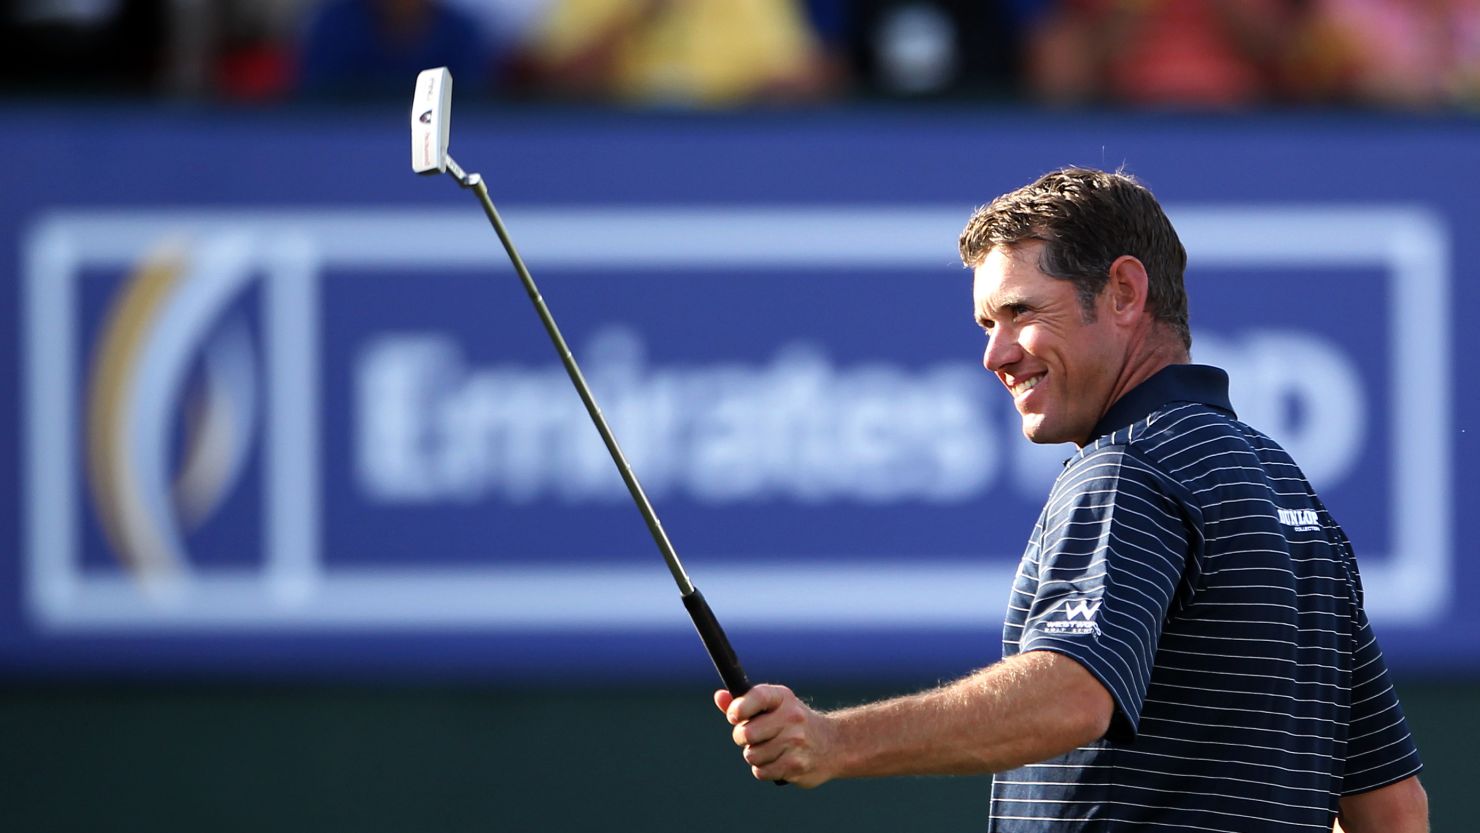 Lee Westwood has much to smile about after grabbing the lead at the Dubai Desert Classic on Saturday